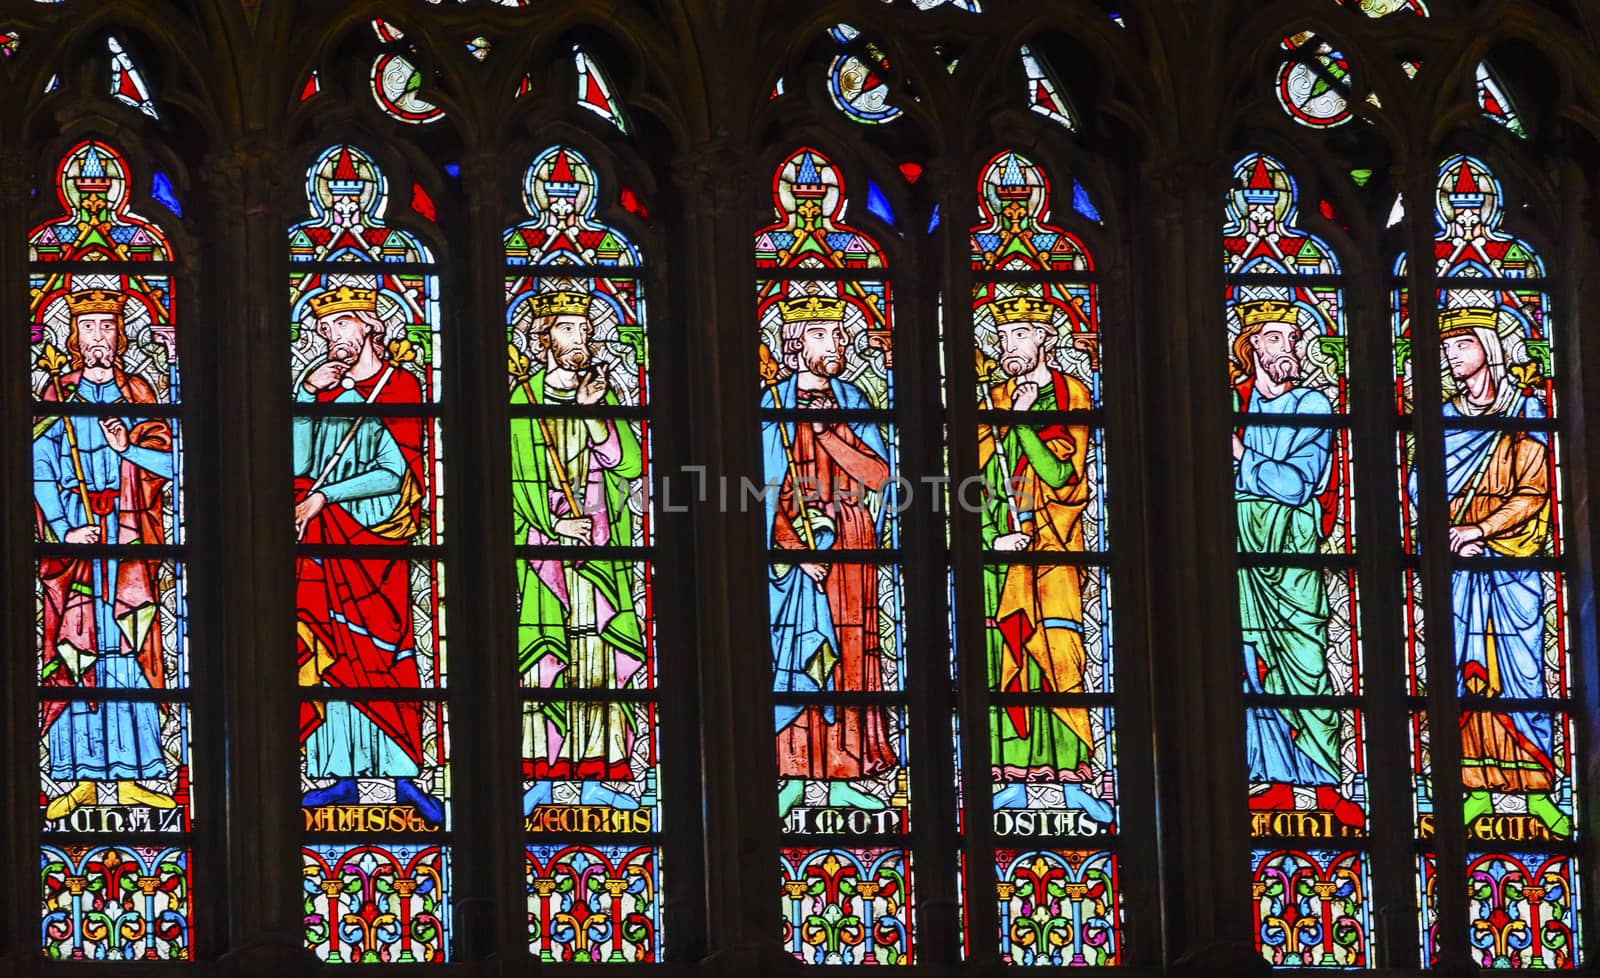 Kings Stained Glass Notre Dame Cathedral Paris France.  Notre Dame was built between 1163 and 1250AD.  